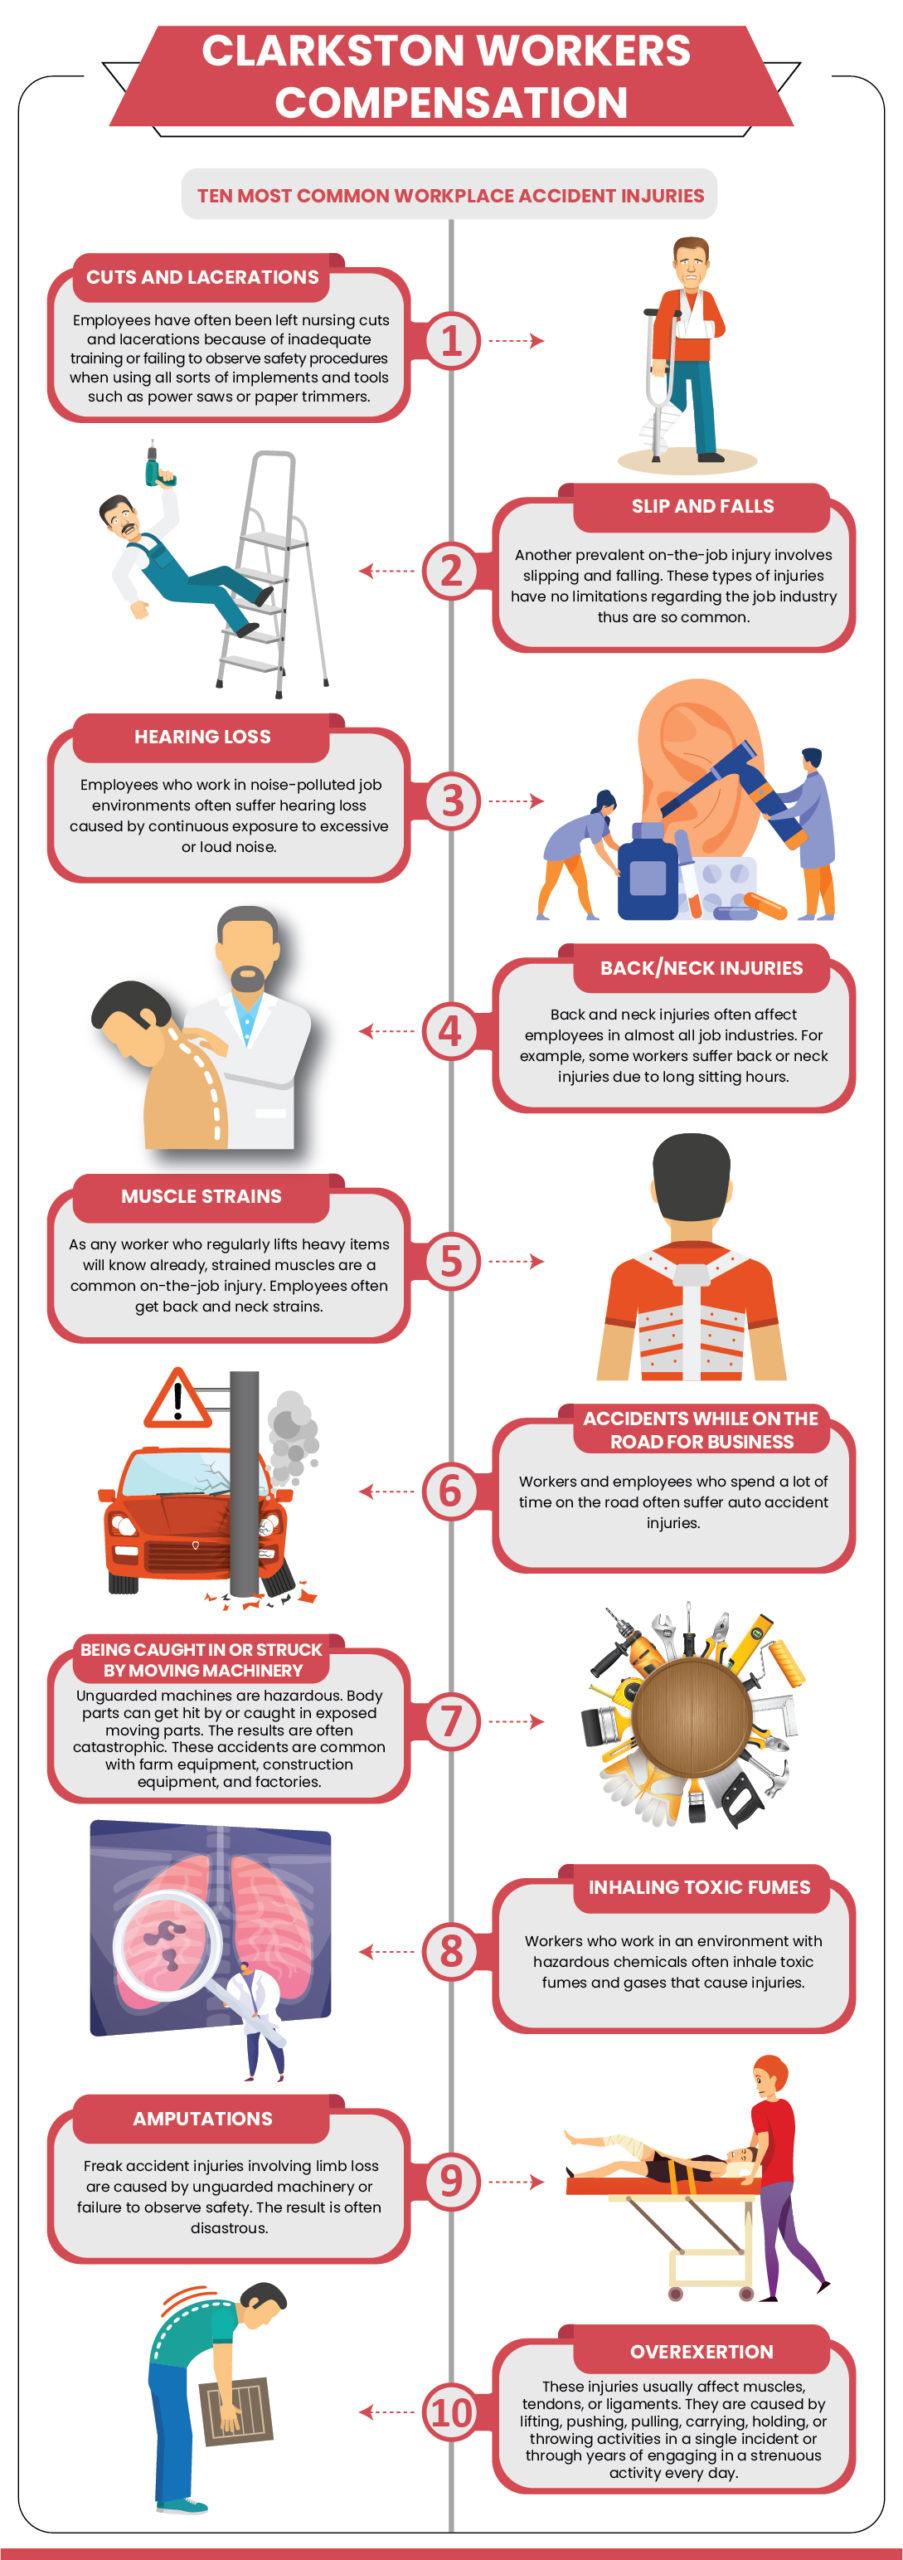 Clarkston Workers Compensation Infographic